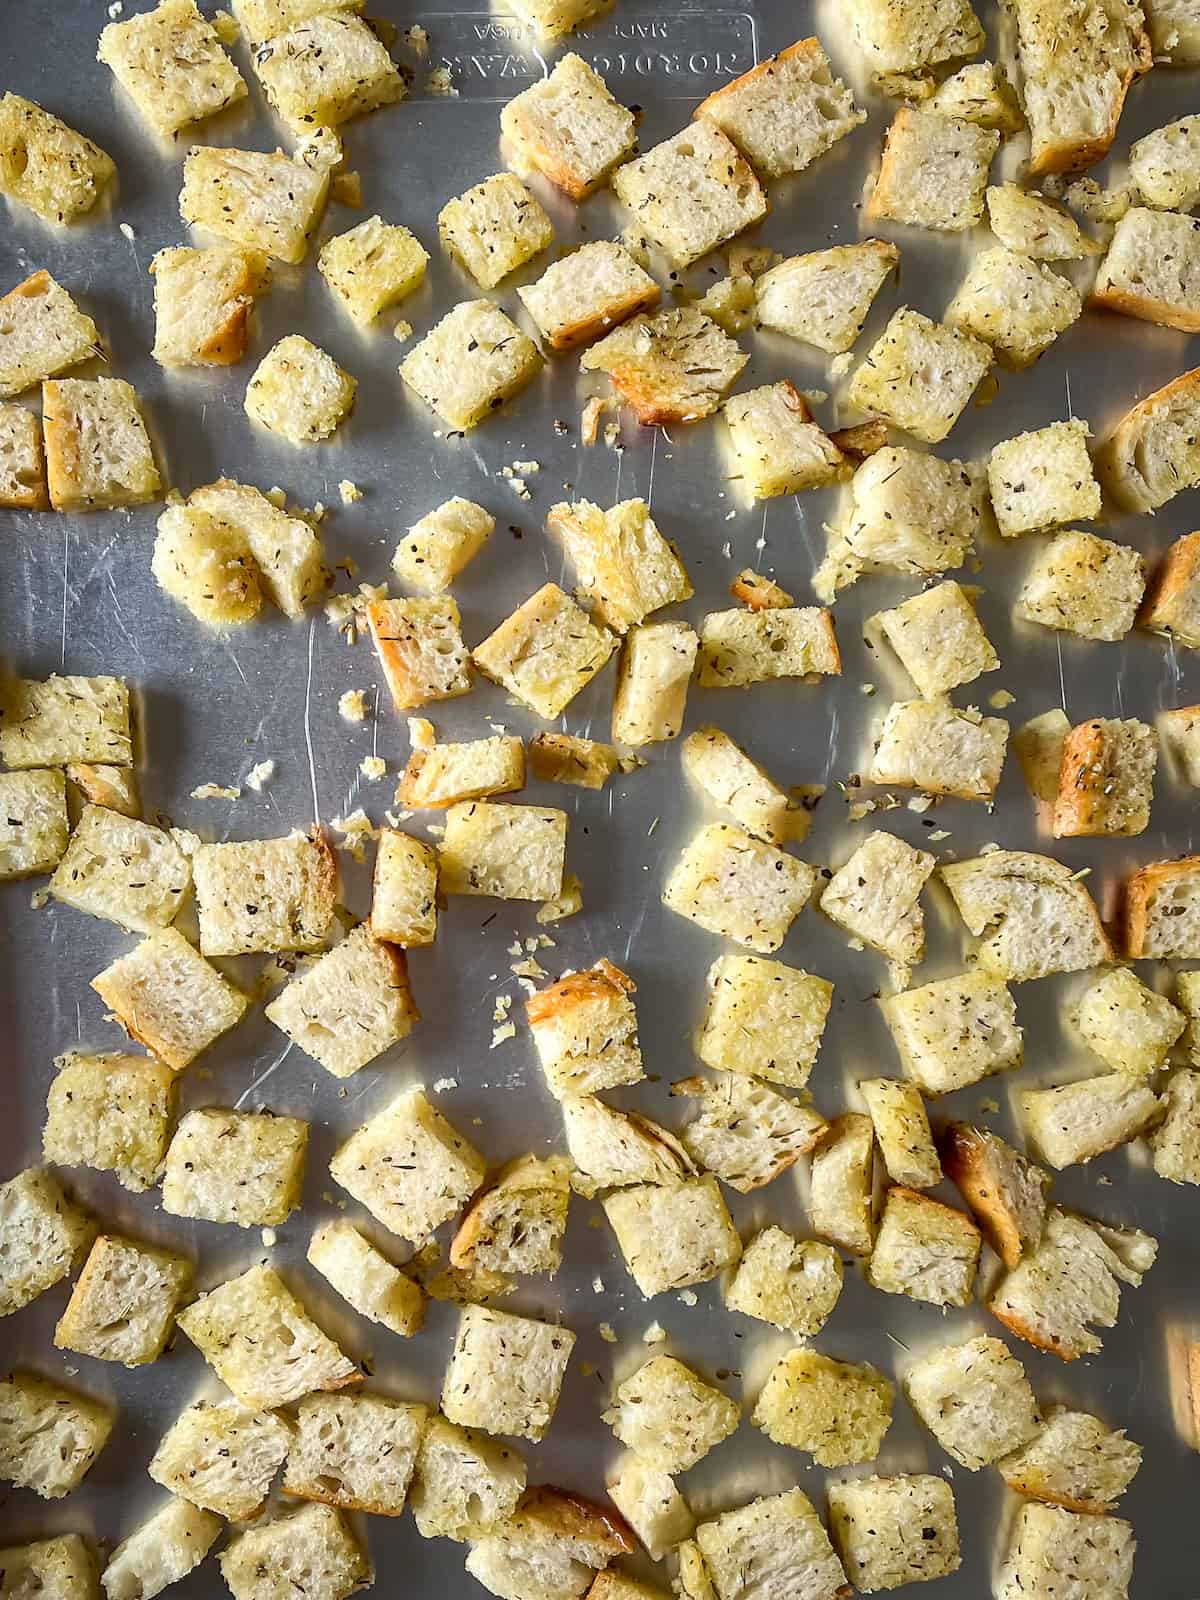 sourdough bread cubes coated in olive oil and spice blend on a baking sheet